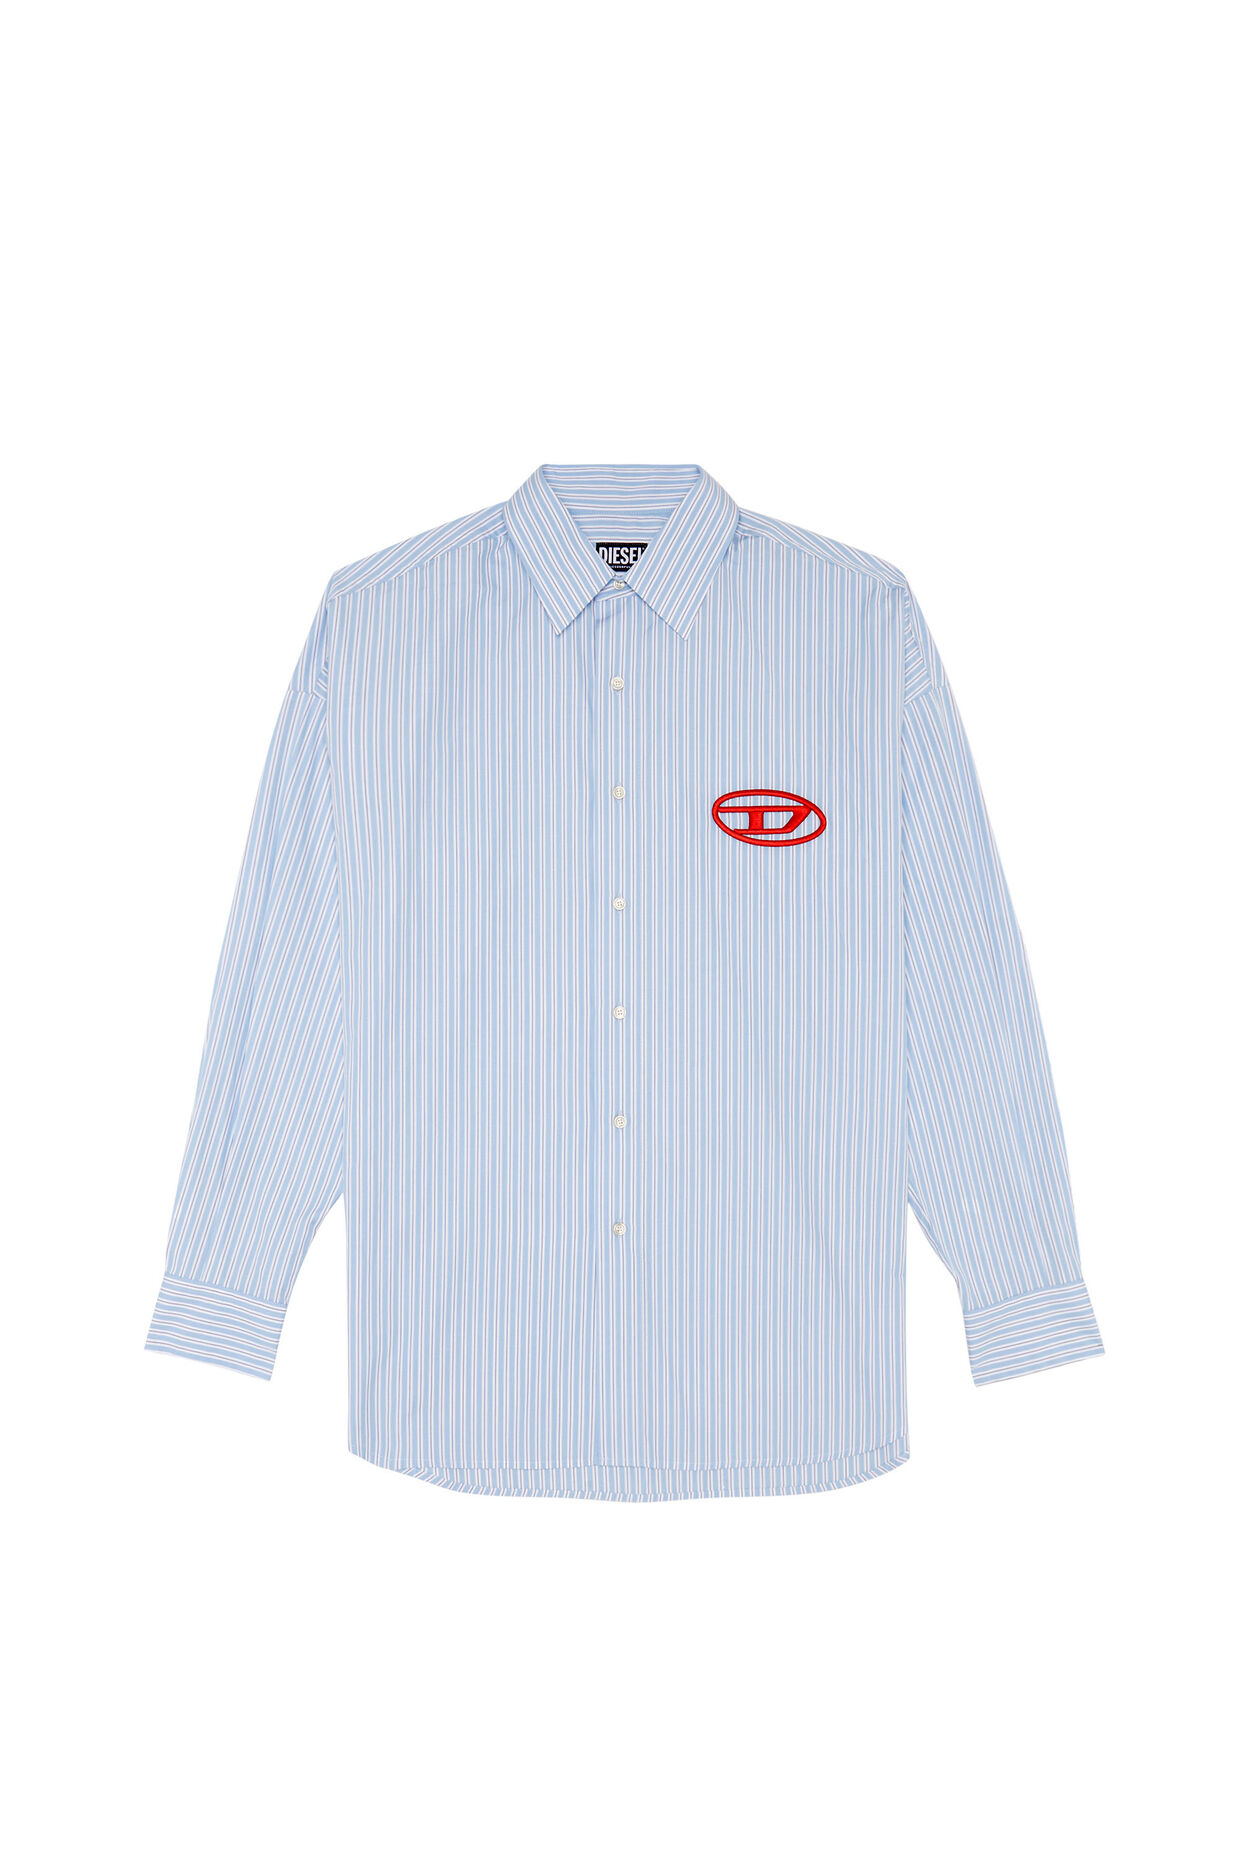 diesel.com | S-Doubly Shirt